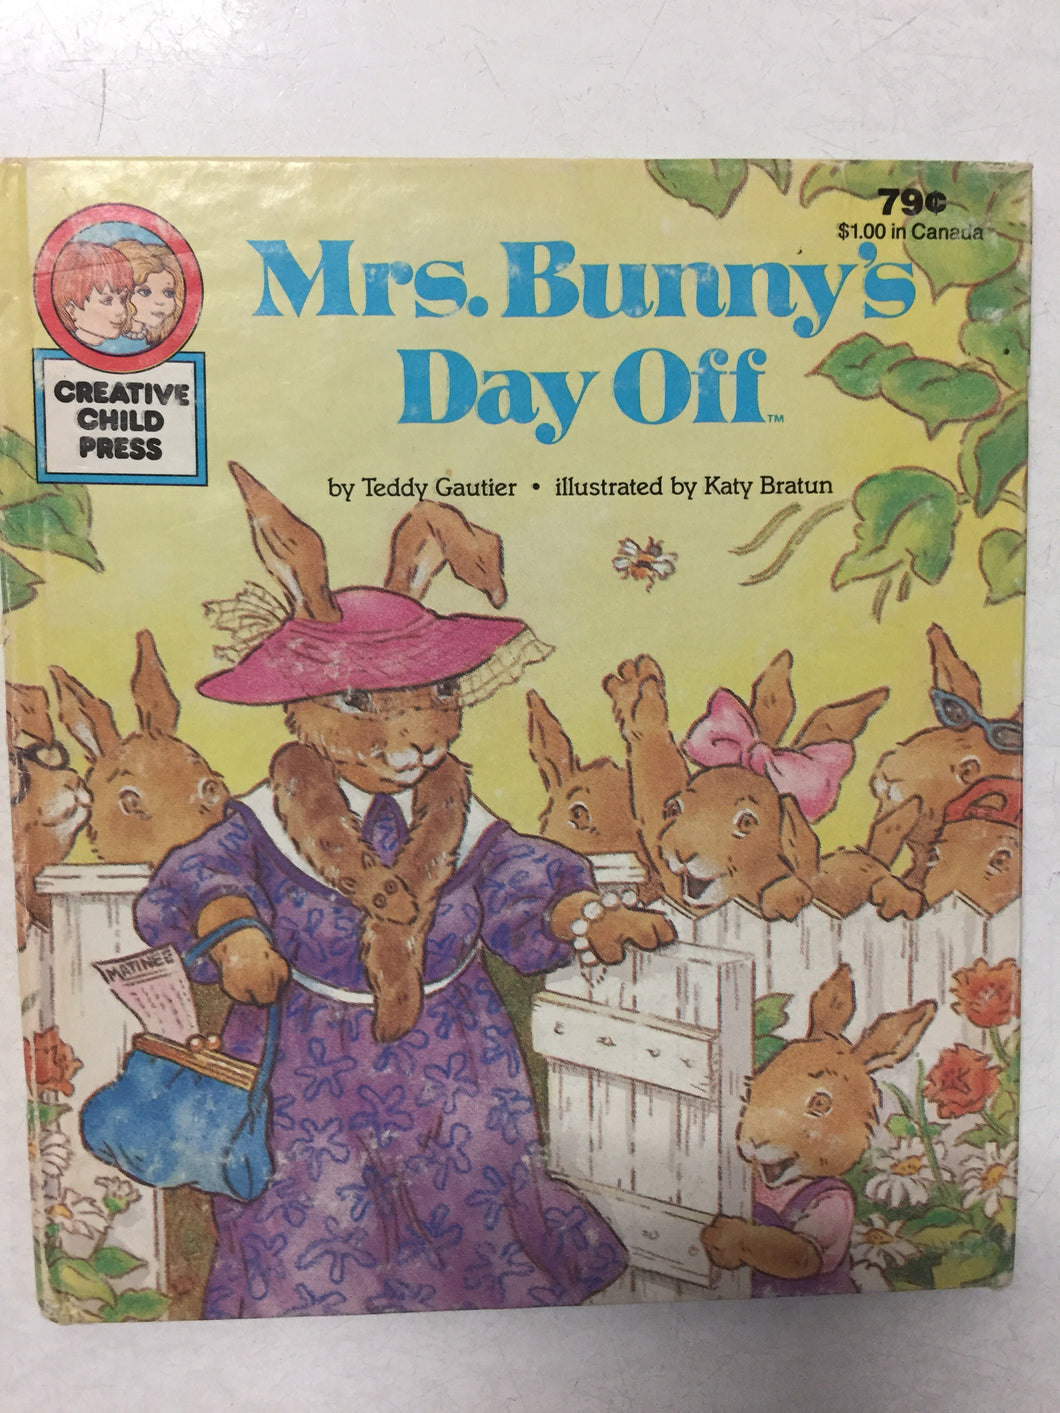 Mrs. Bunny's Day Off